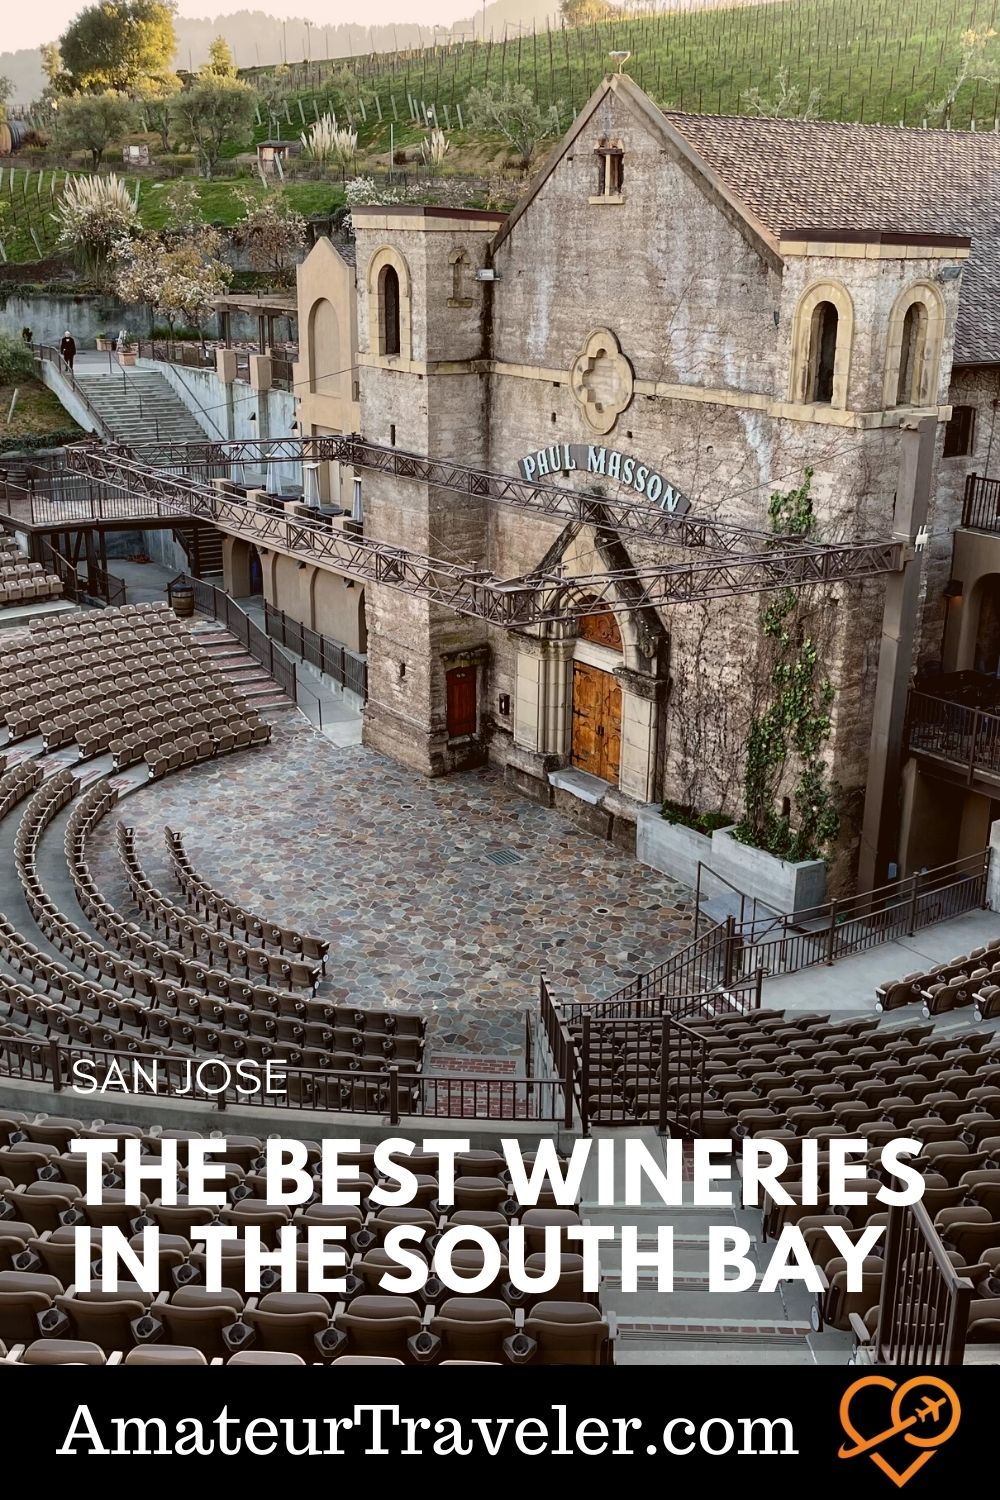 San Jose Wineries - The Best Wineries in the South Bay #san-jose #california #wine #winery #travel #trip #vacation